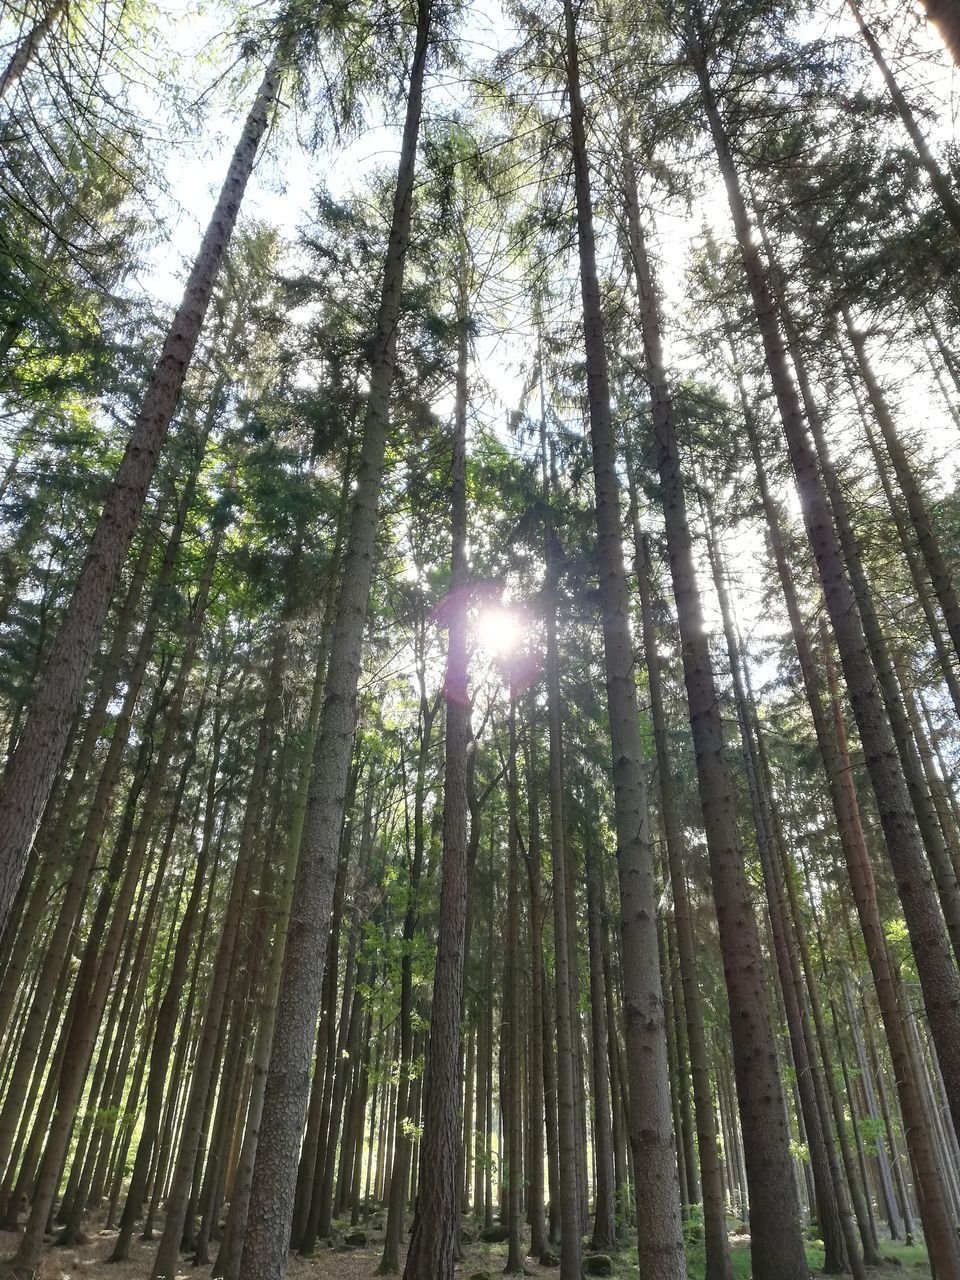 LOW ANGLE VIEW OF SUN STREAMING THROUGH TREES IN FOREST